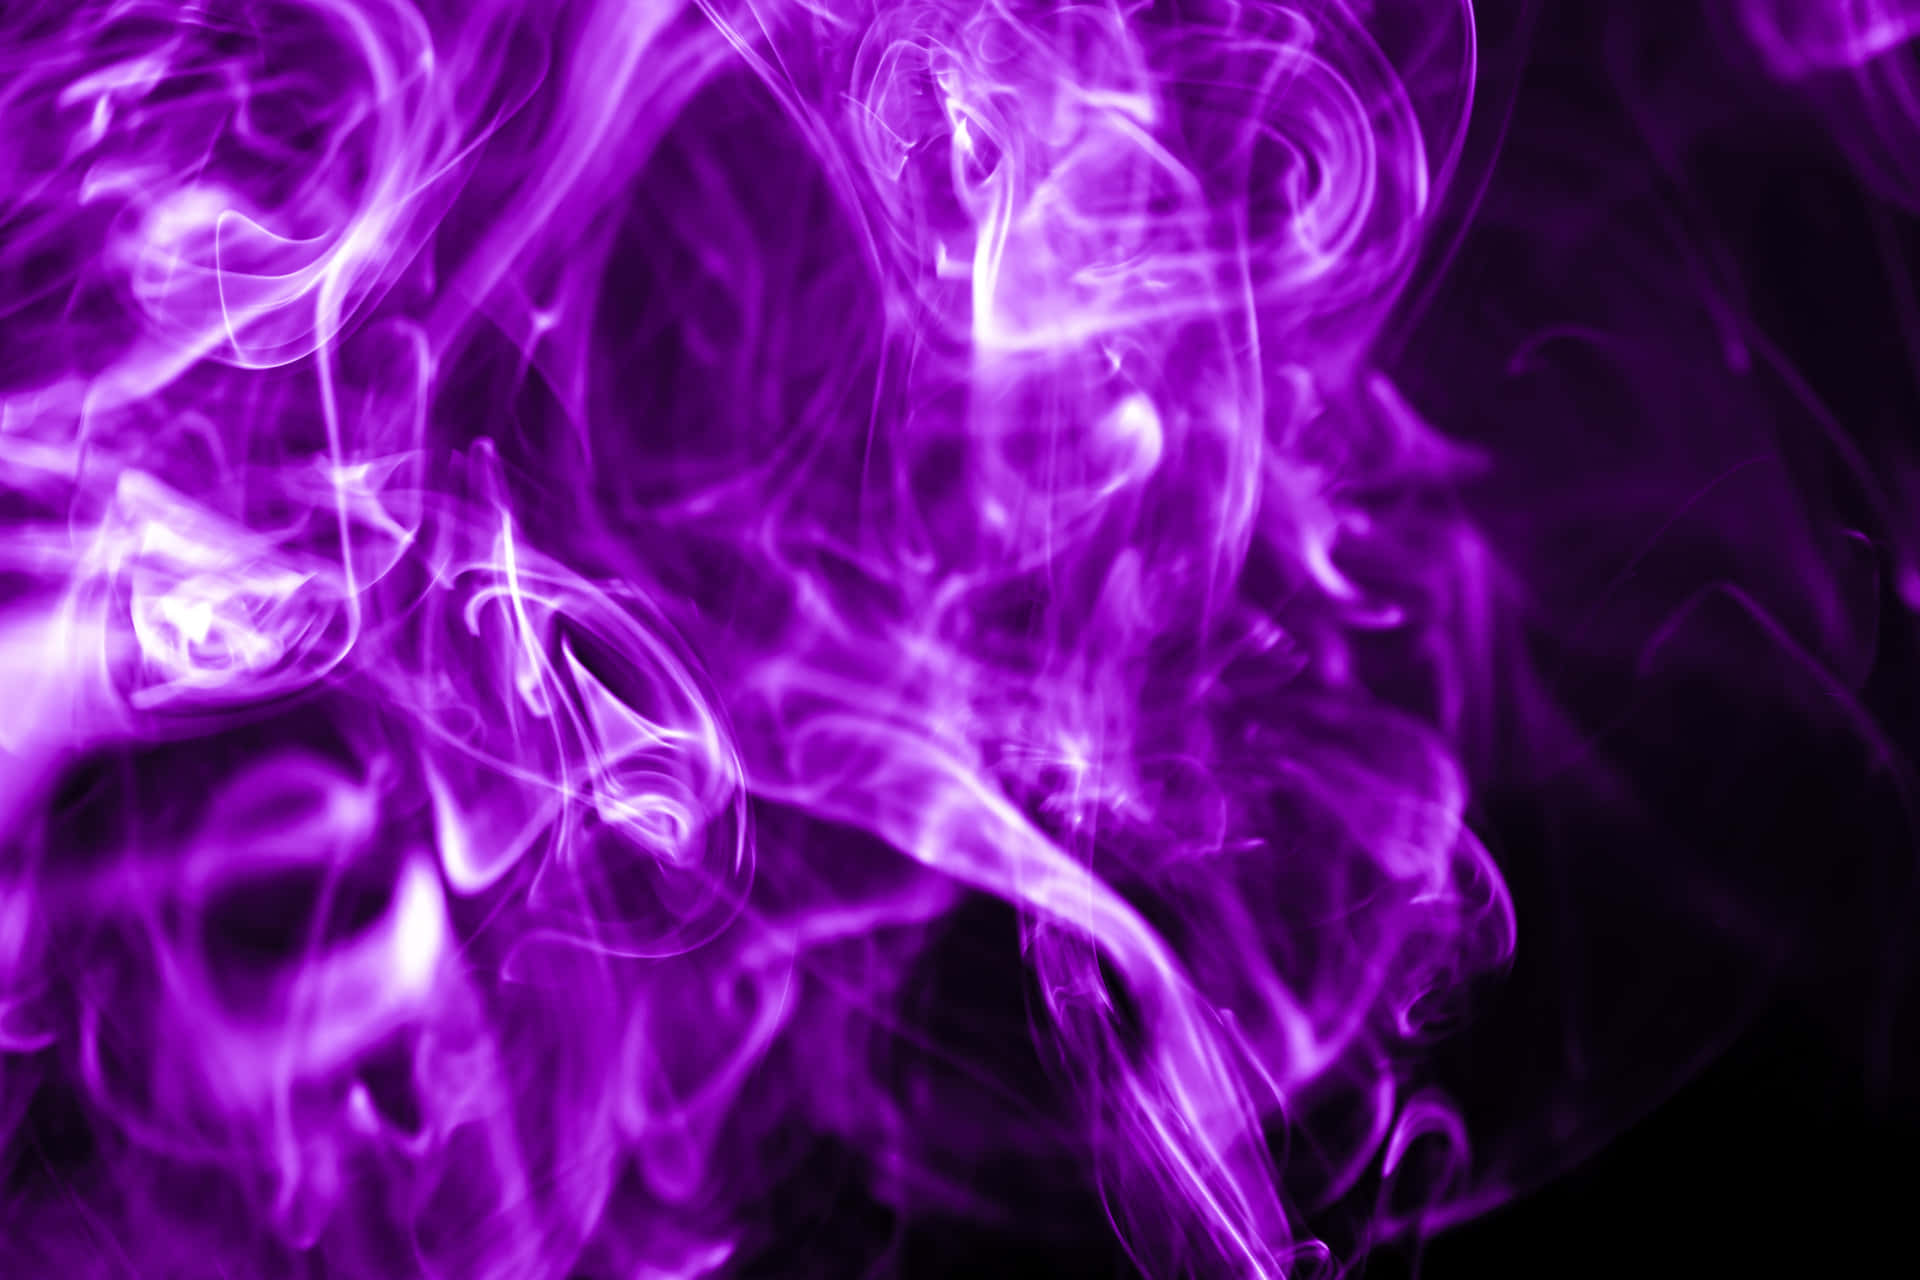 A breathtaking sight of purple smoke cascading from the sky.